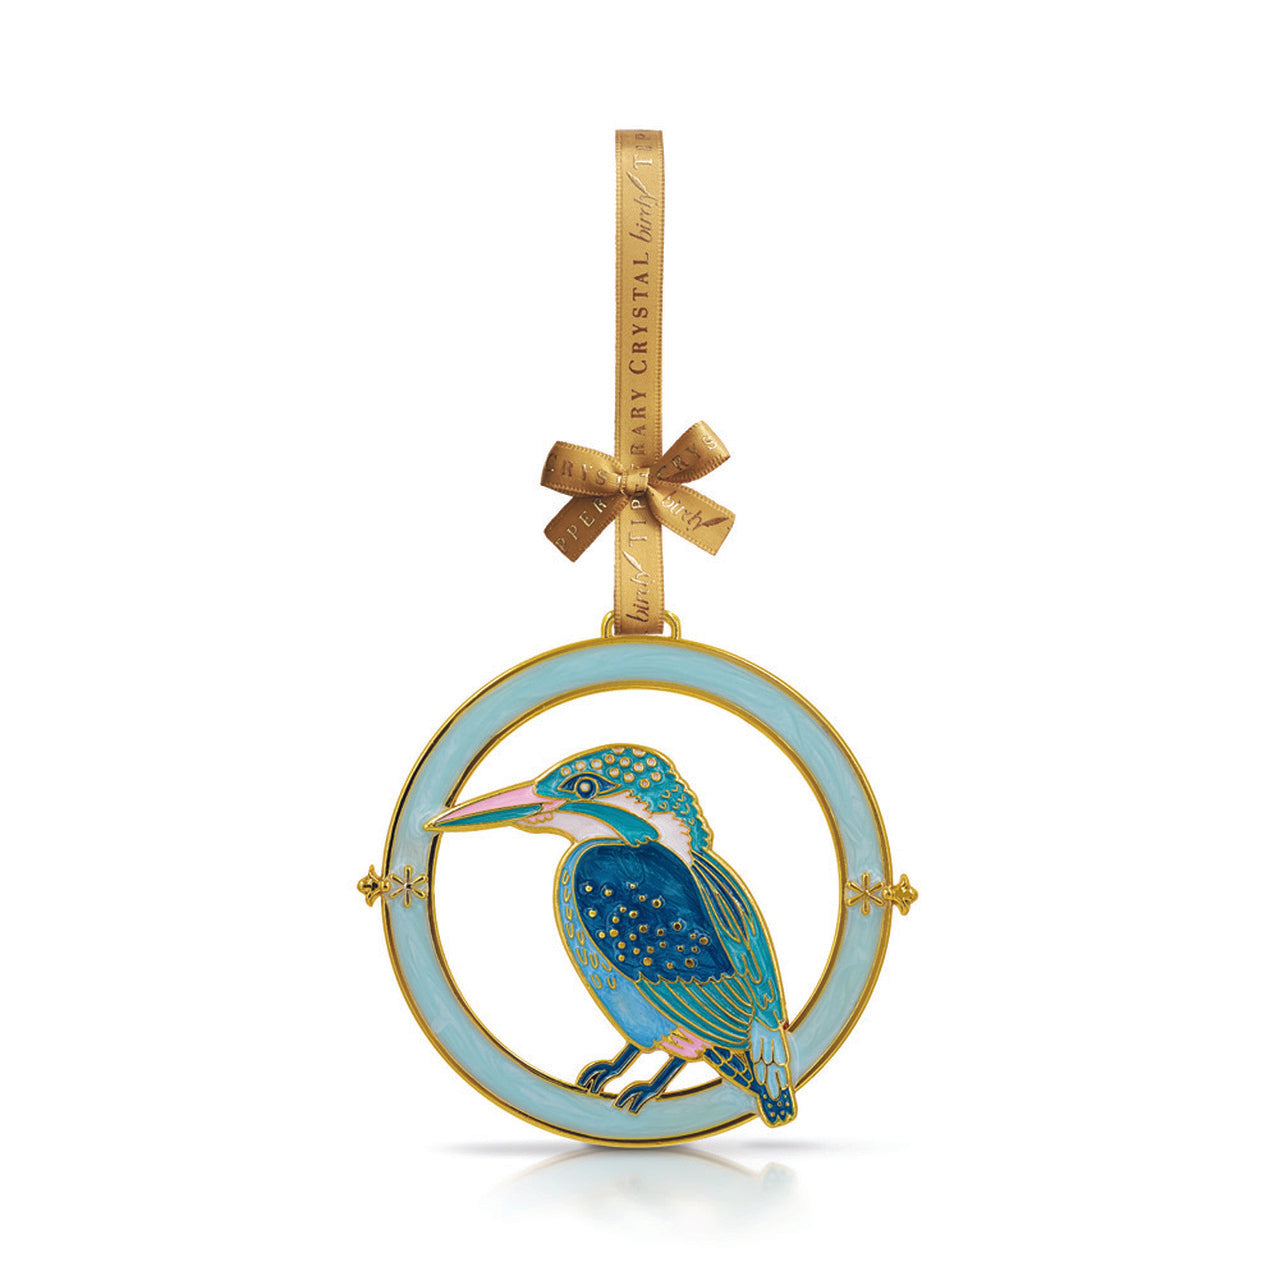 Tipperary Crystal Hanging Christmas Decoration - Kingfisher